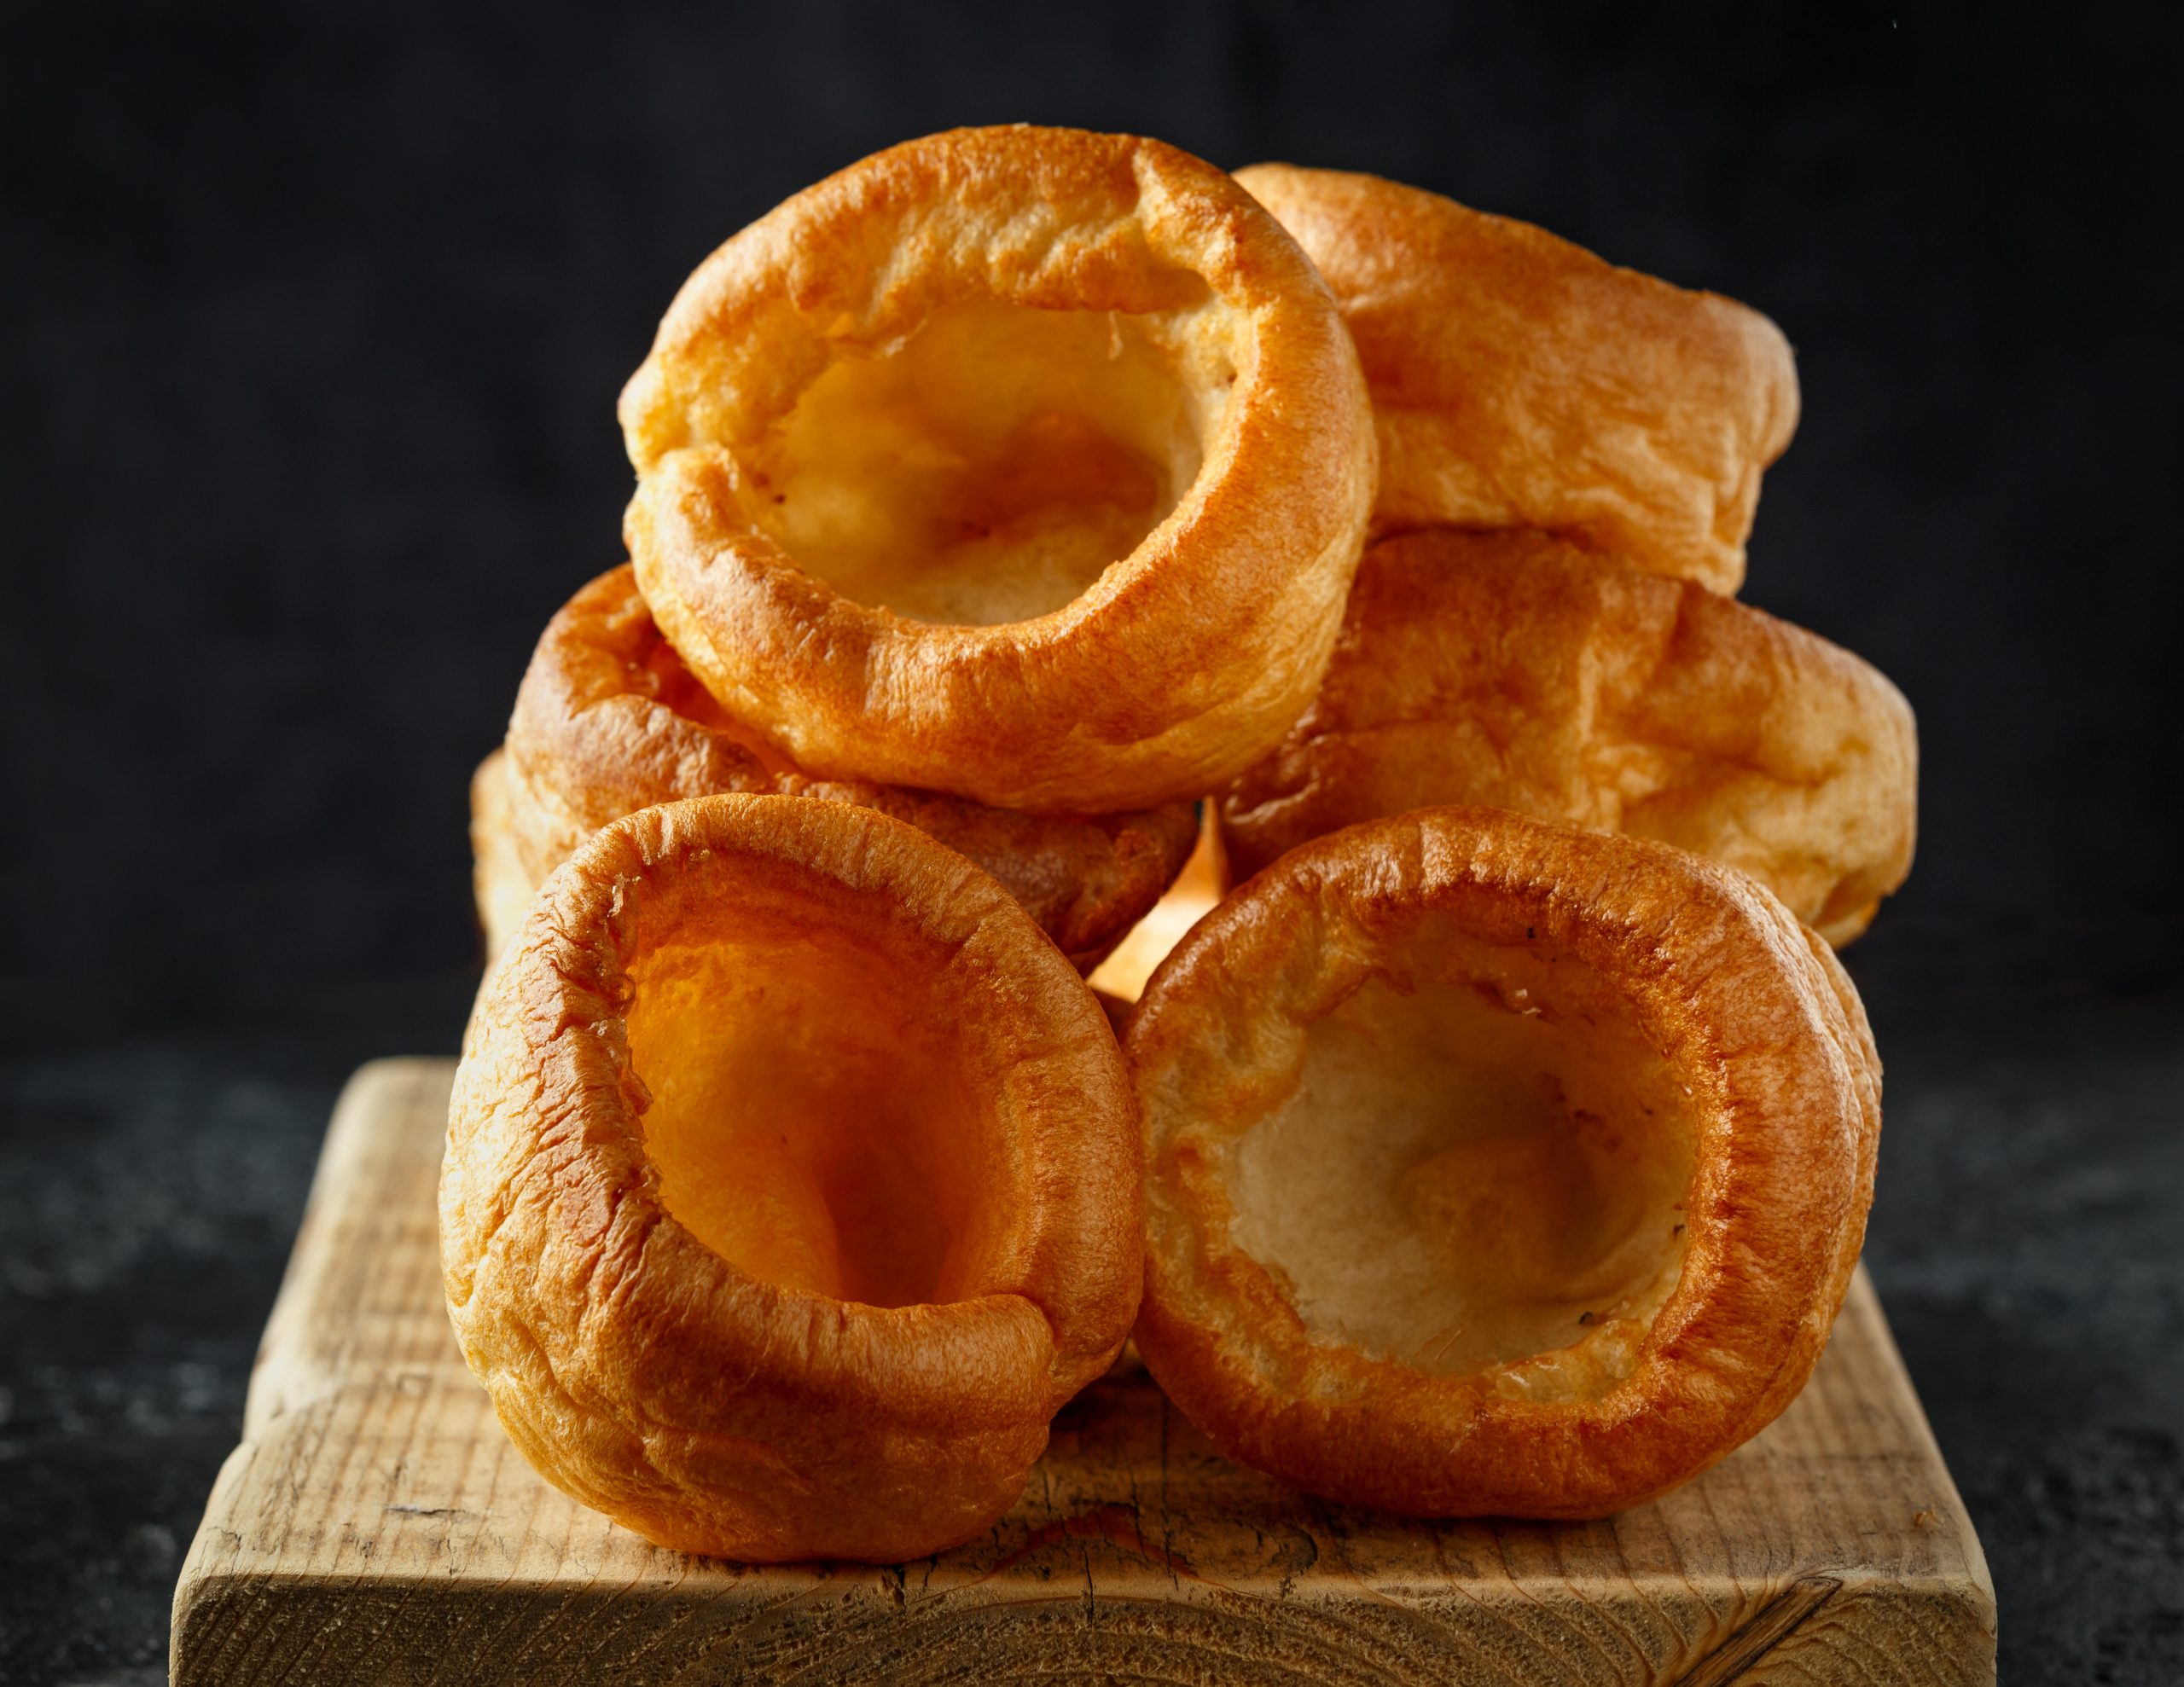 Homemaid Yorkshire puddings. Perfect for National Yorkshire Pudding Day.